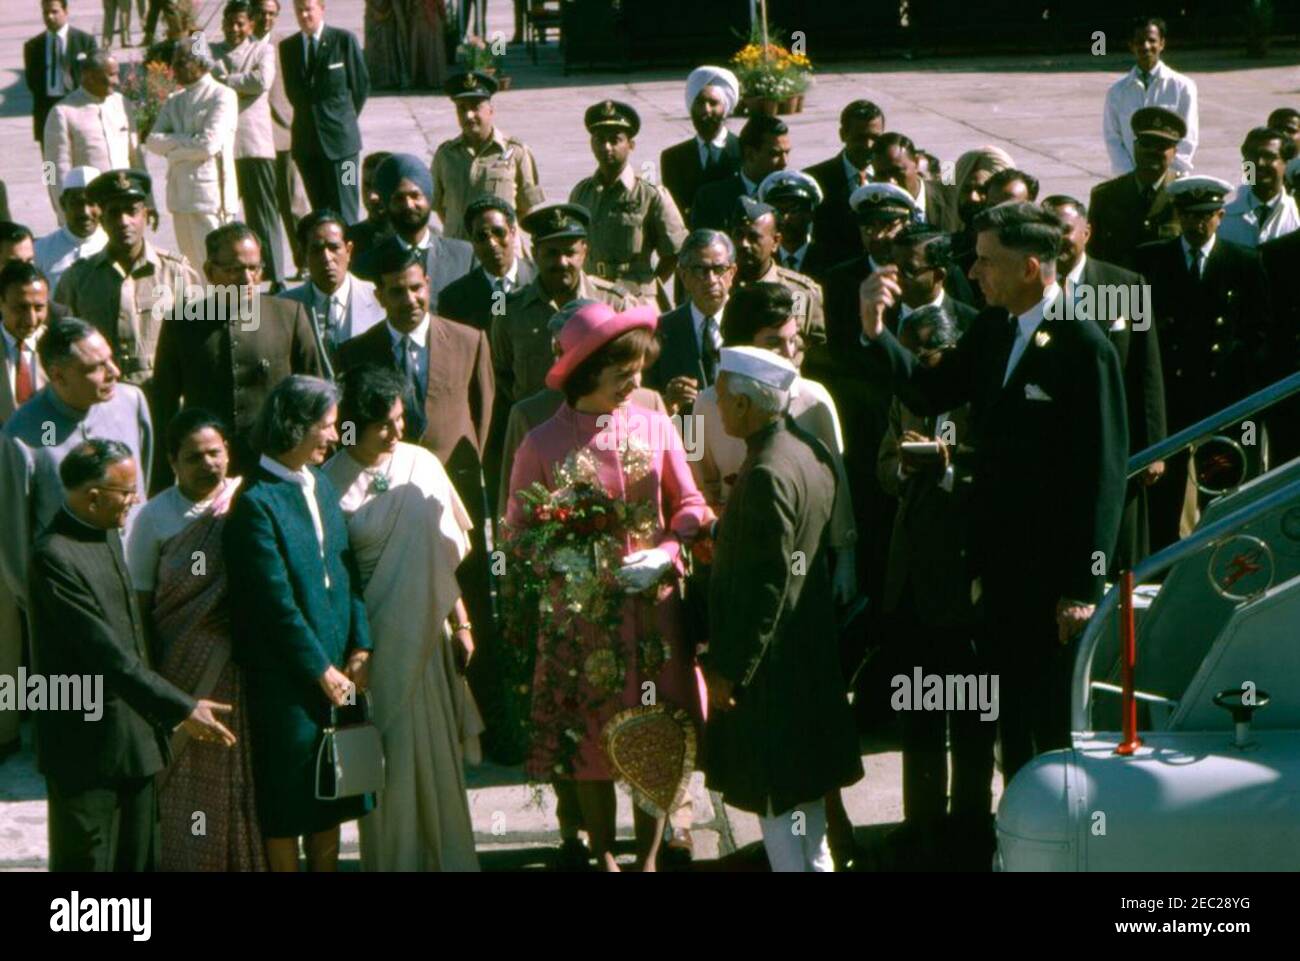 First Lady Jacqueline Kennedyu2019s (JBK) trip to India and Pakistan: New Delhi, Delhi, India, arrival. First Lady Jacqueline Kennedy (center, wearing pink) visits with Prime Minister of India, Jawaharlal Nehru, upon her arrival at Palam Airport in New Delhi, India. Also pictured: Indian Ambassador to the United States, B. K. Nehru (far left, wearing light gray jacket); Kitty Galbraith (front, left), wife of the United States Ambassador to India, John Kenneth Galbraith; daughter of the Prime Minister, Indira Gandhi (left of Mrs. Kennedy); Mrs. Kennedyu2019s sister, Princess Lee Radziwill of Stock Photo